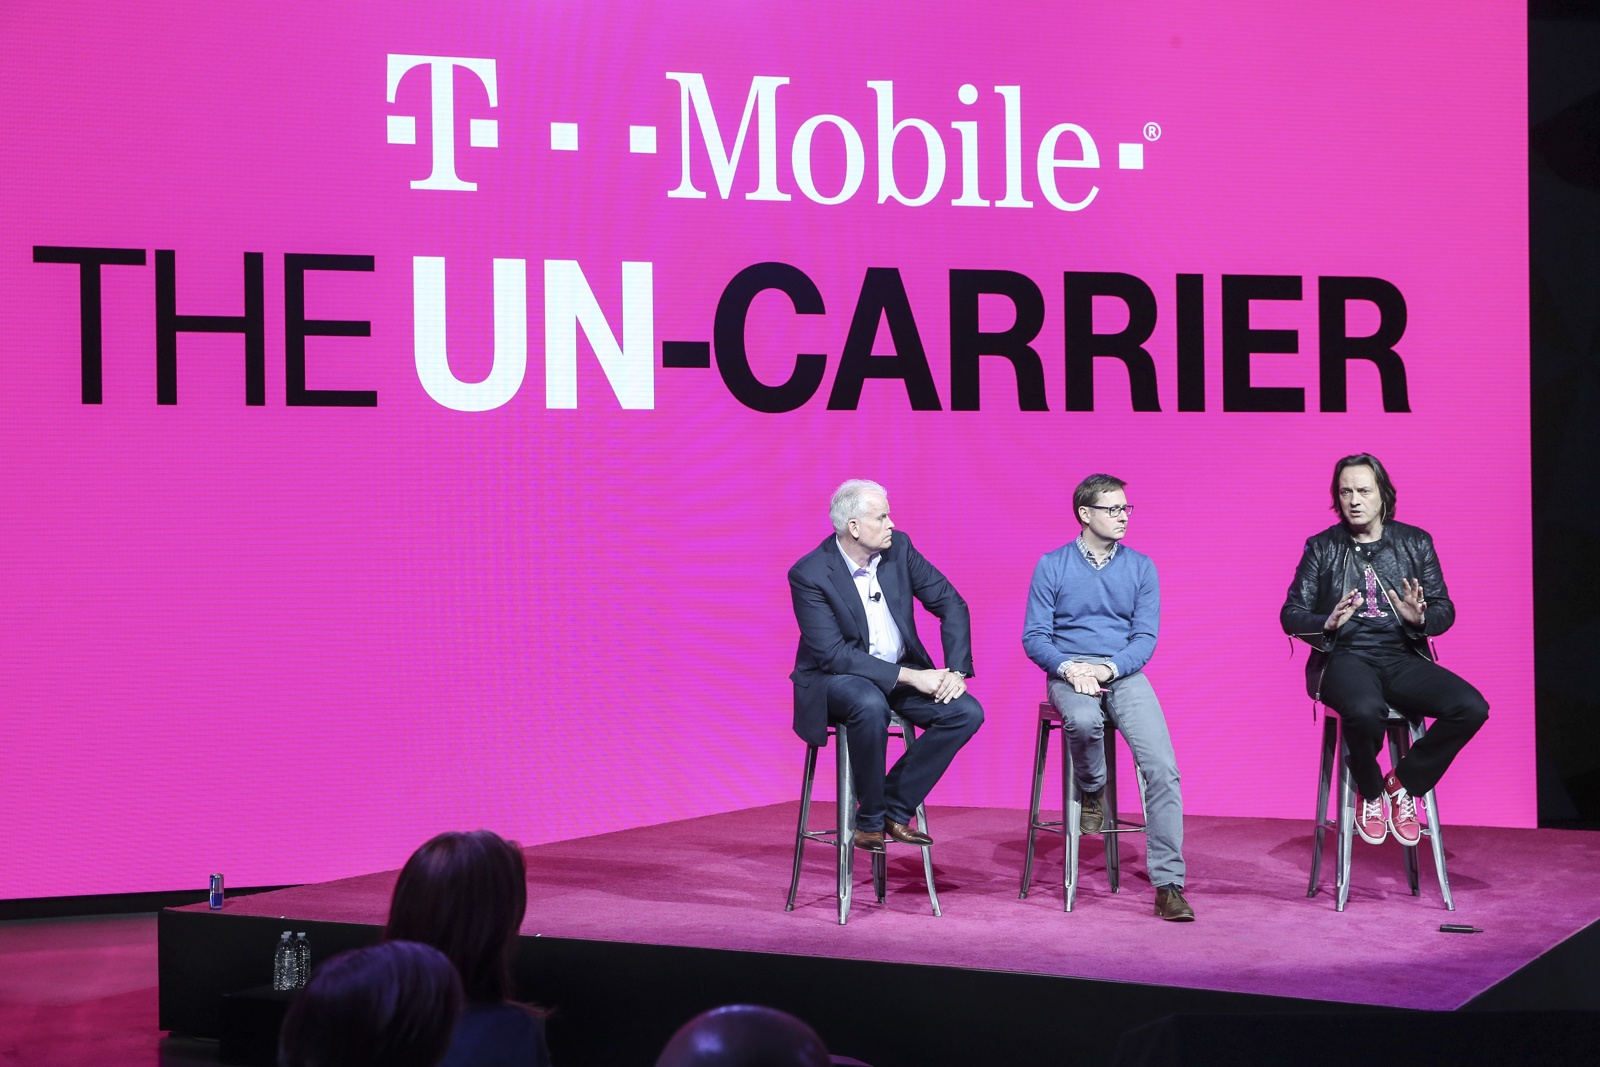 t-mobiles-next-uncarrier-move-could-be-unlimited-streaming-video-image-cultofandroidcomwp-contentuploads201510TMOUncarrier0517-jpg